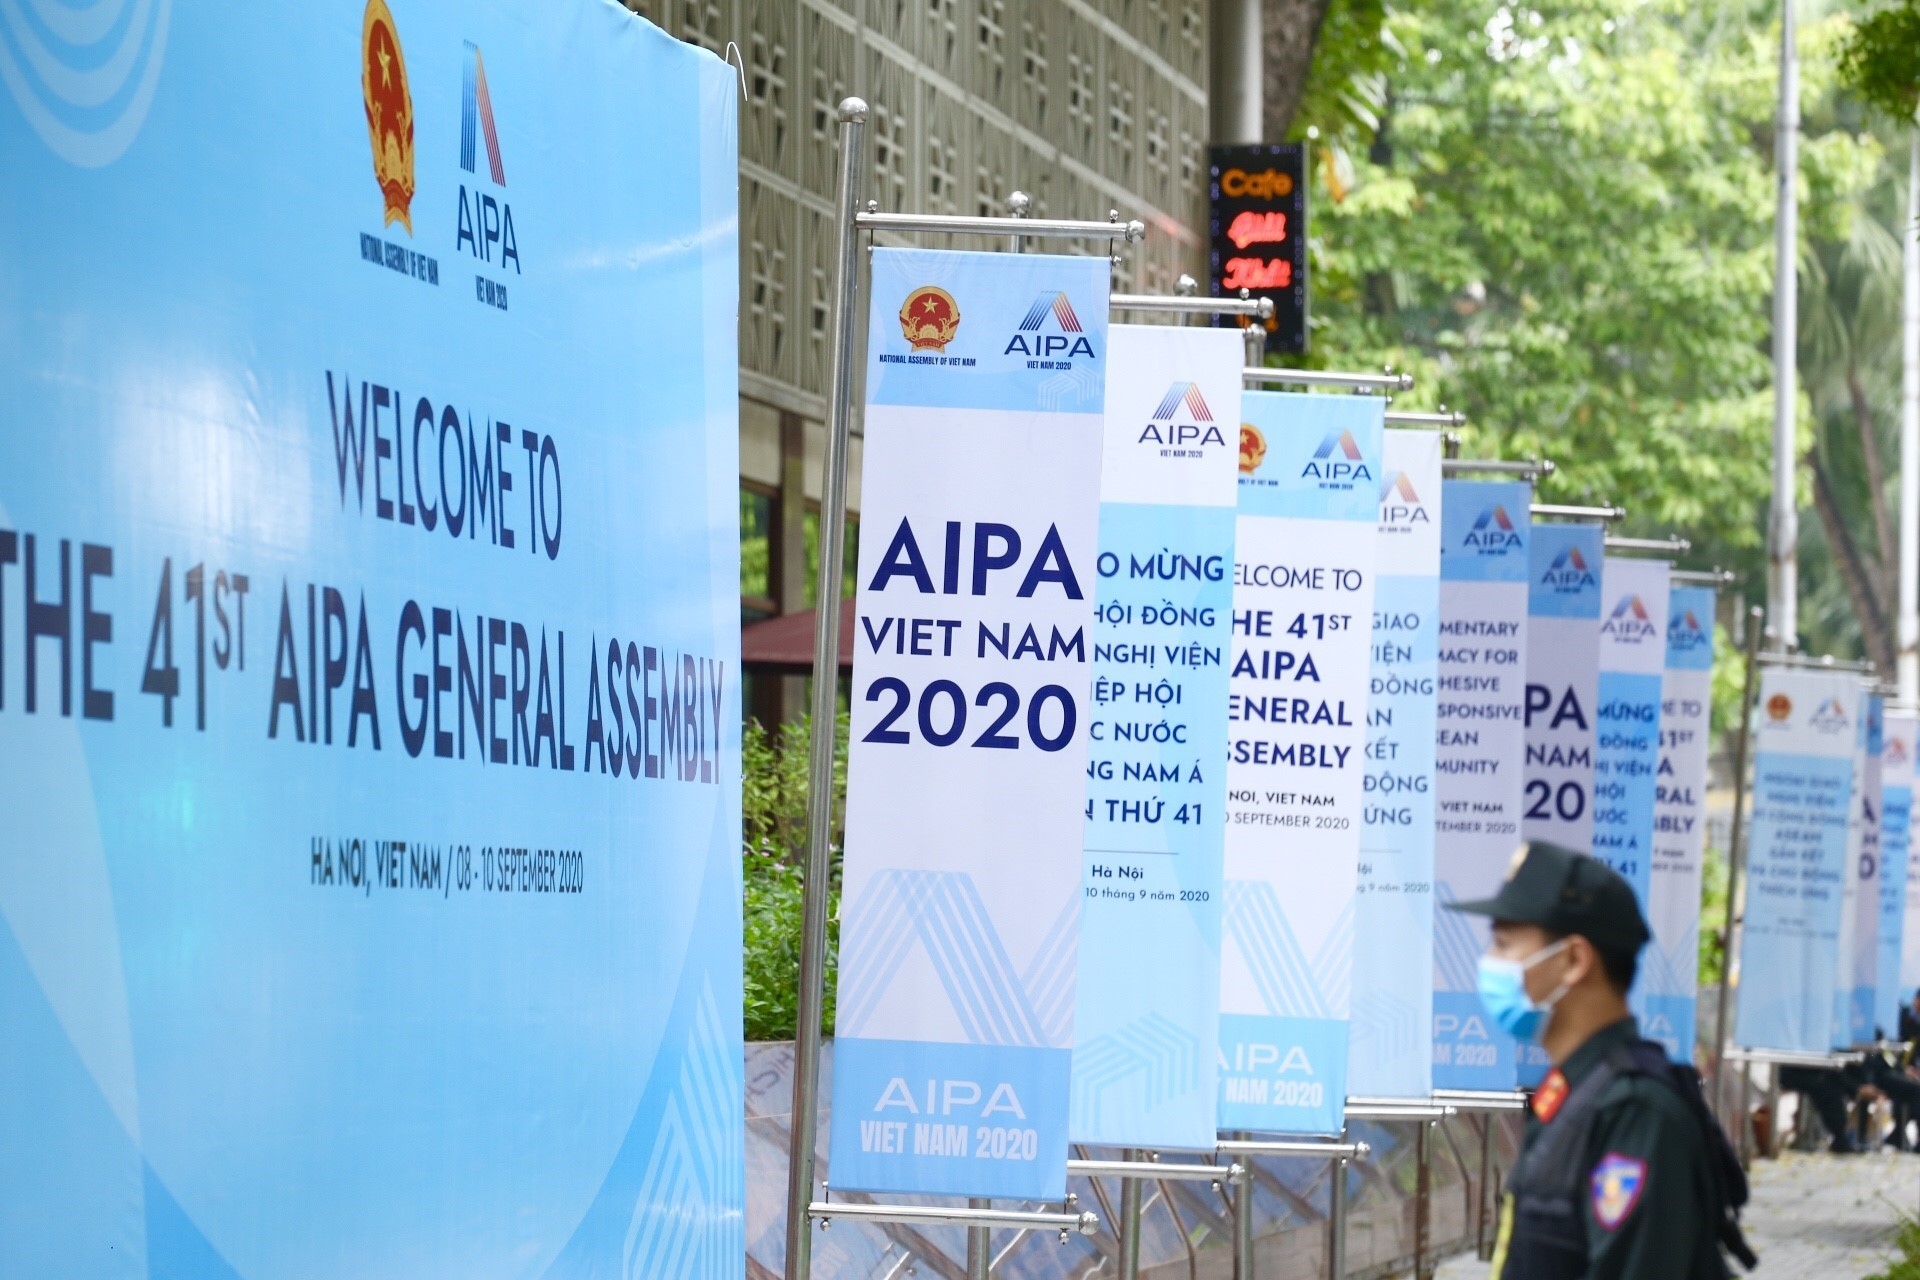 Panels and posters outside the AIPA 41’s venue (Photo: VNA)